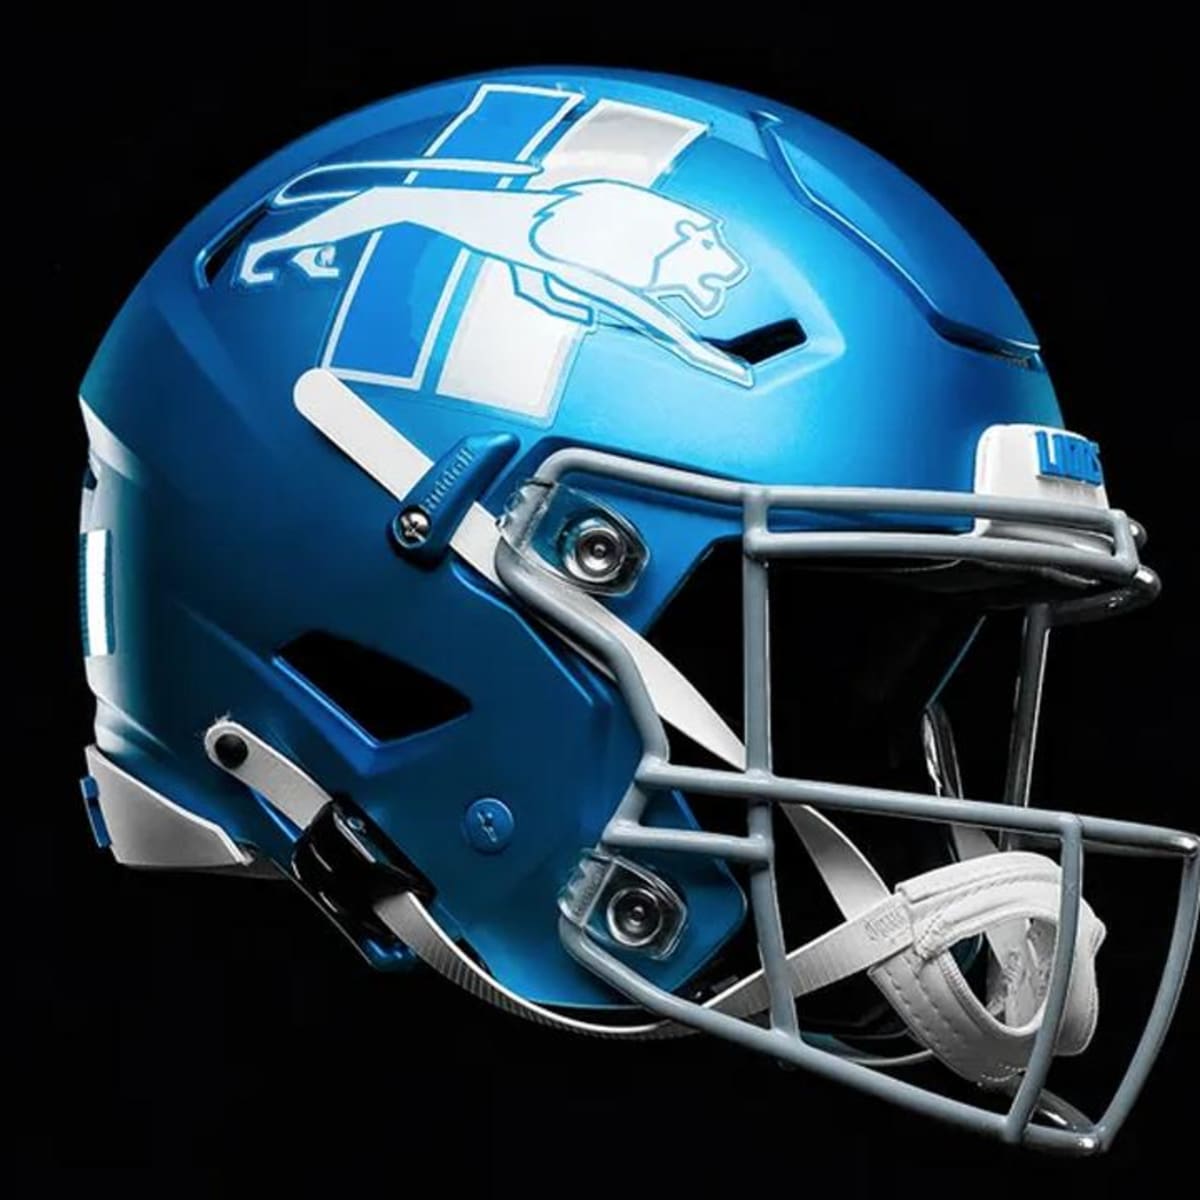 Not bad. Not good. Lions new helmet sits somewhere in the middle